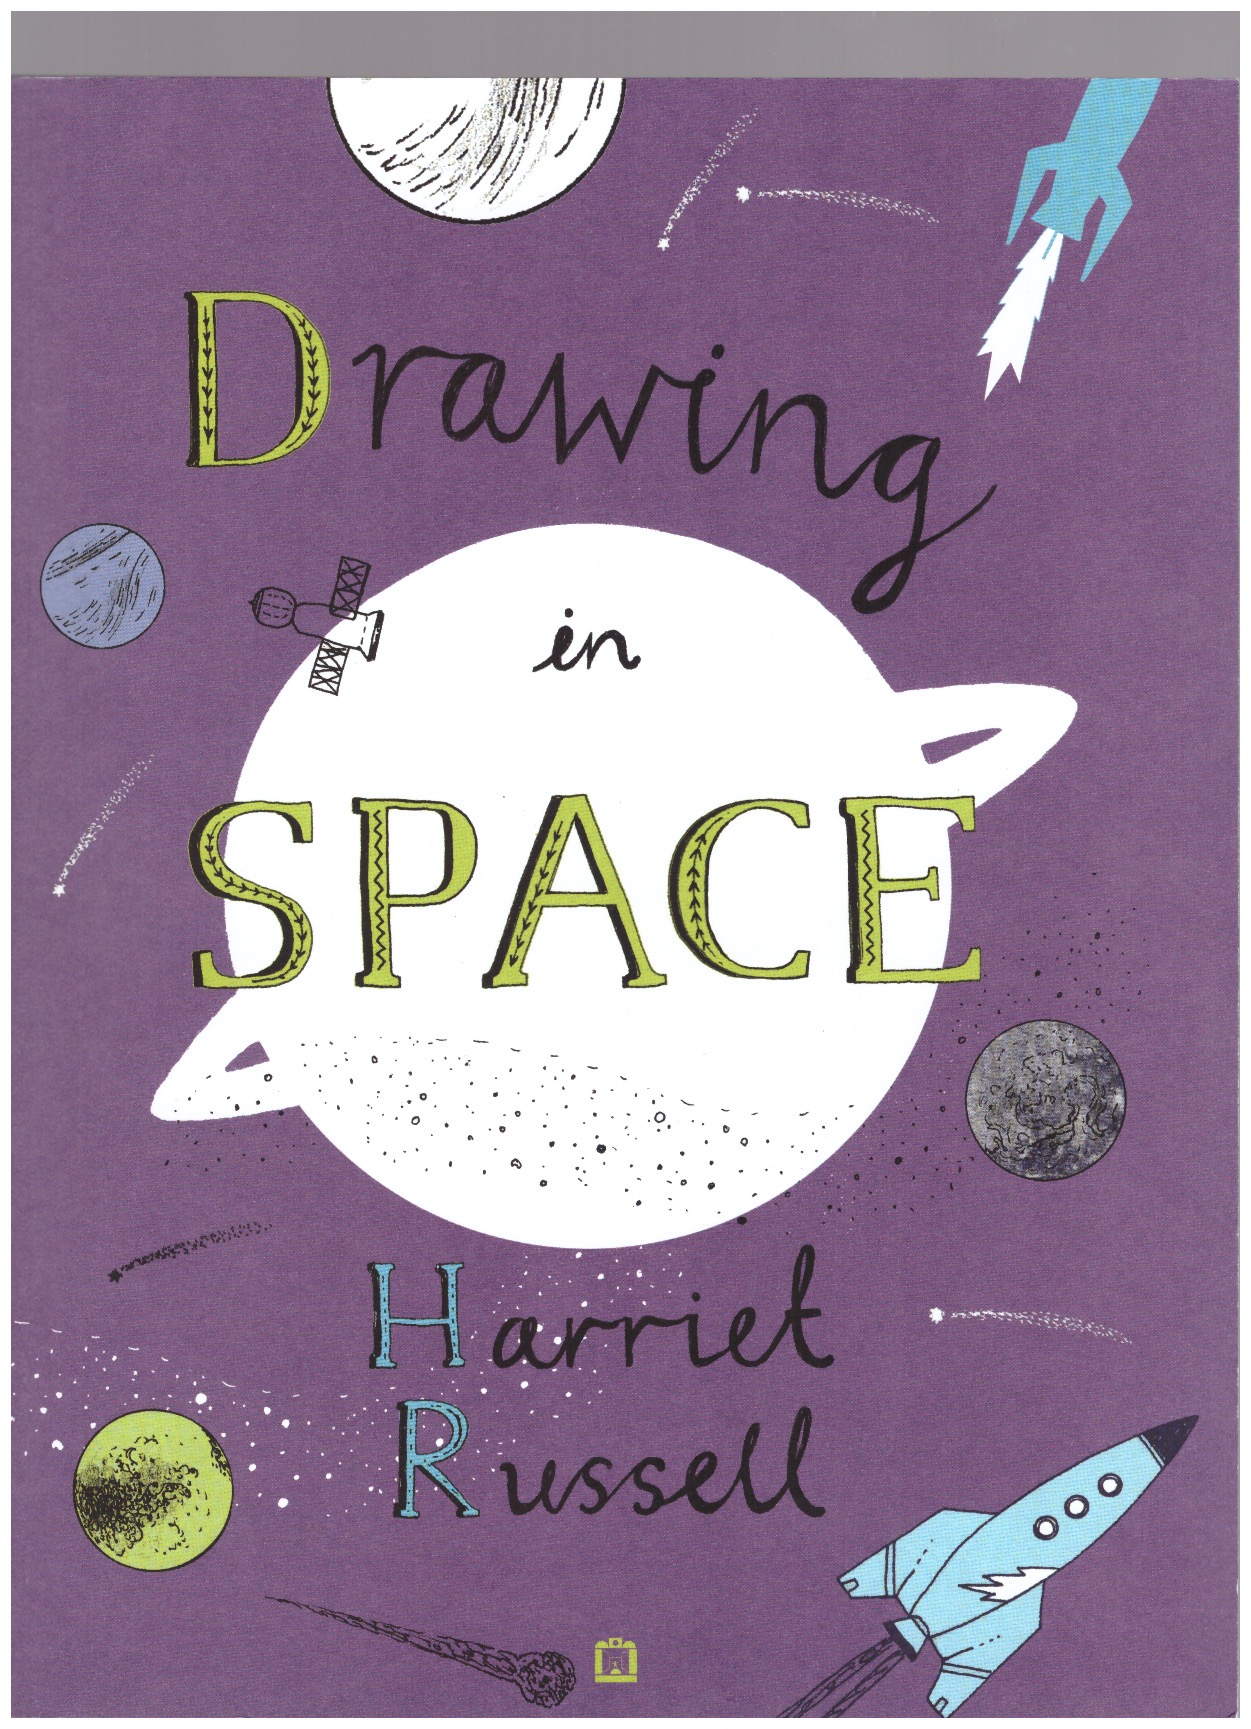 RUSSELL, Harriet - Drawing in space